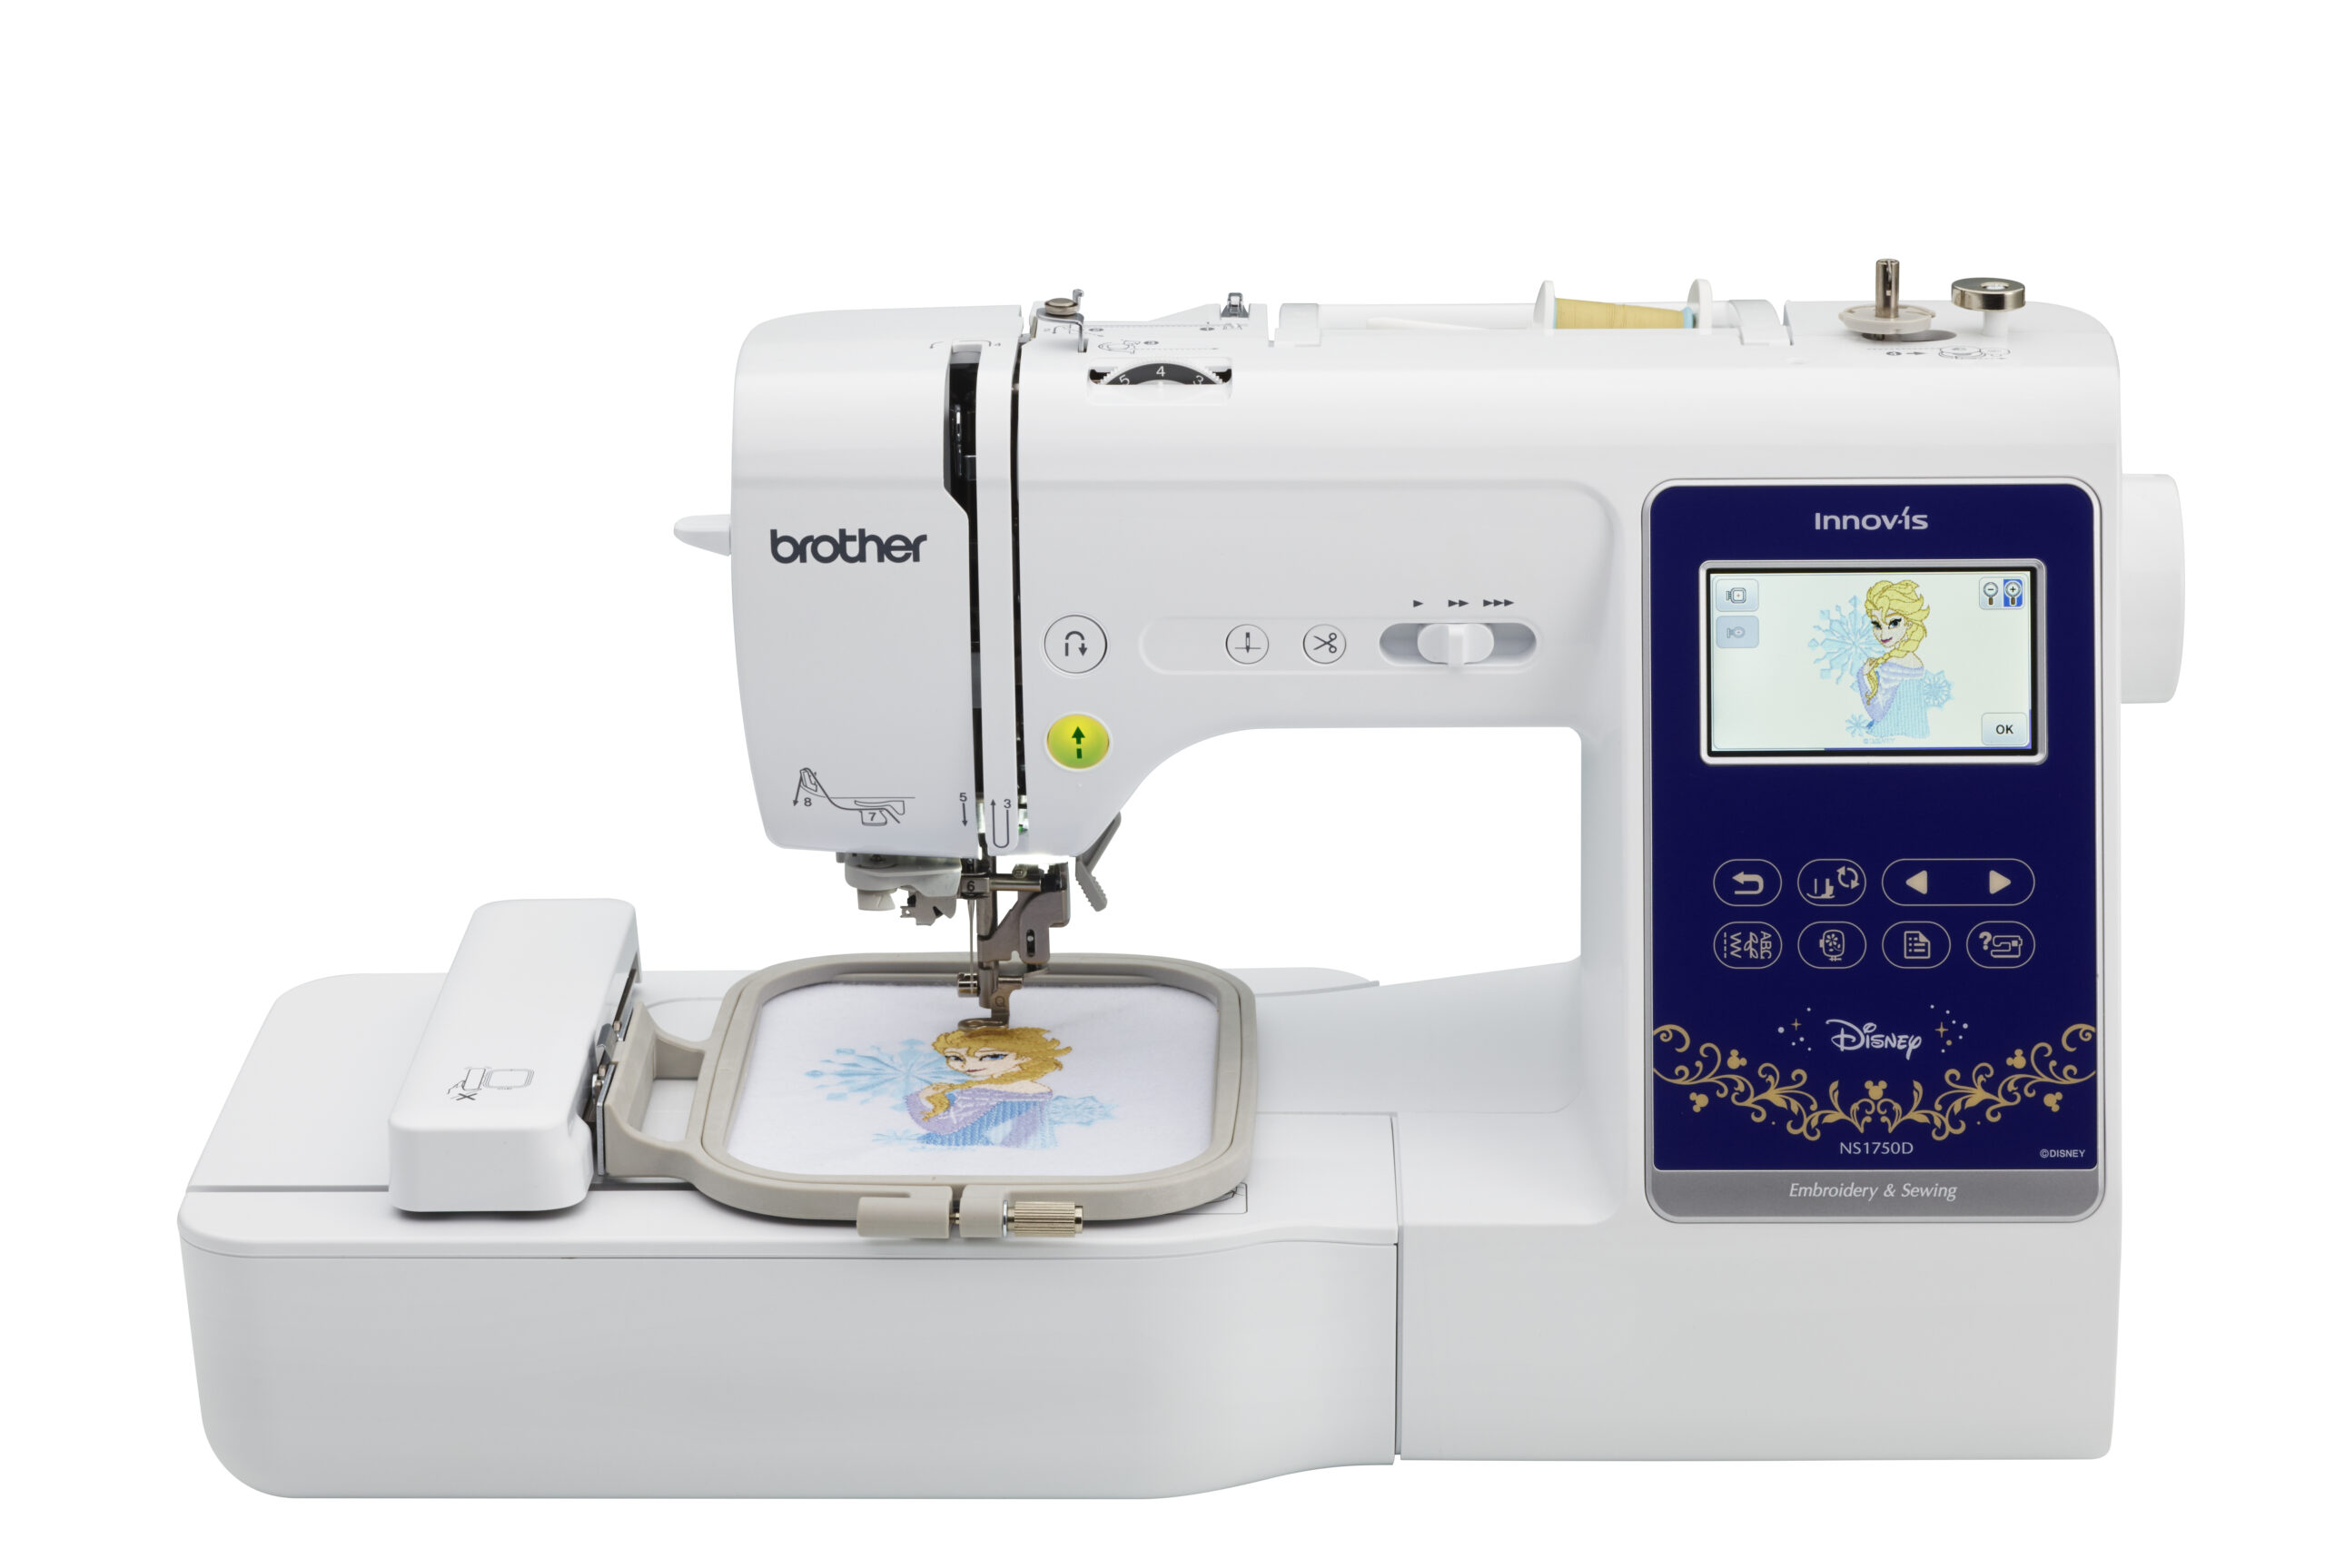 Brother-Innov-is-NS1750D-Embroidery-and-sewing-machine